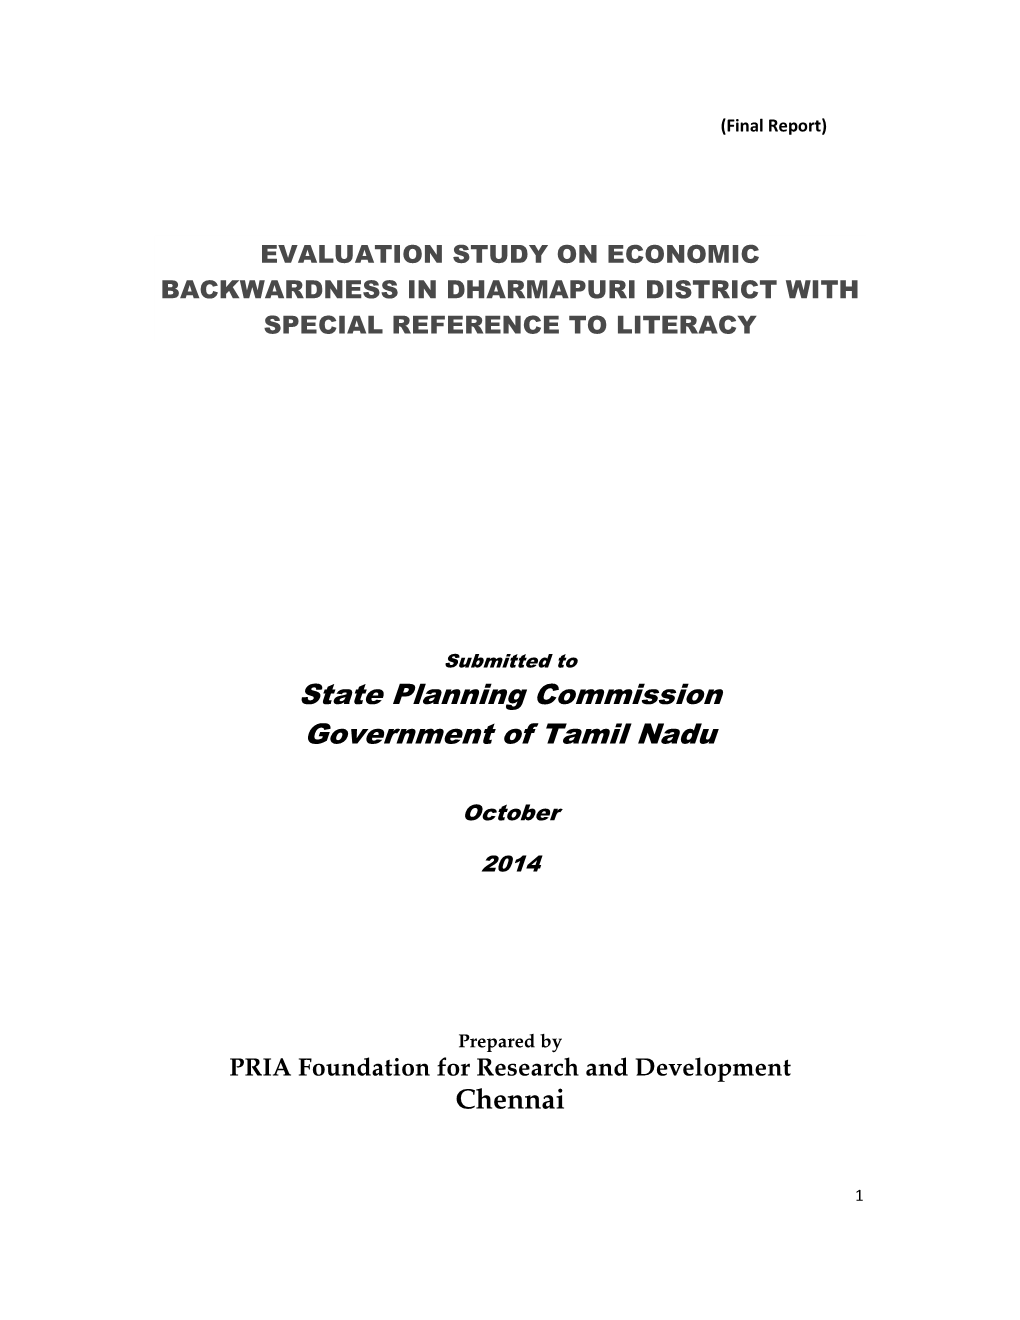 Evaluation Study on Economic Backwardness in Dharmapuri District with Special Reference to Literacy